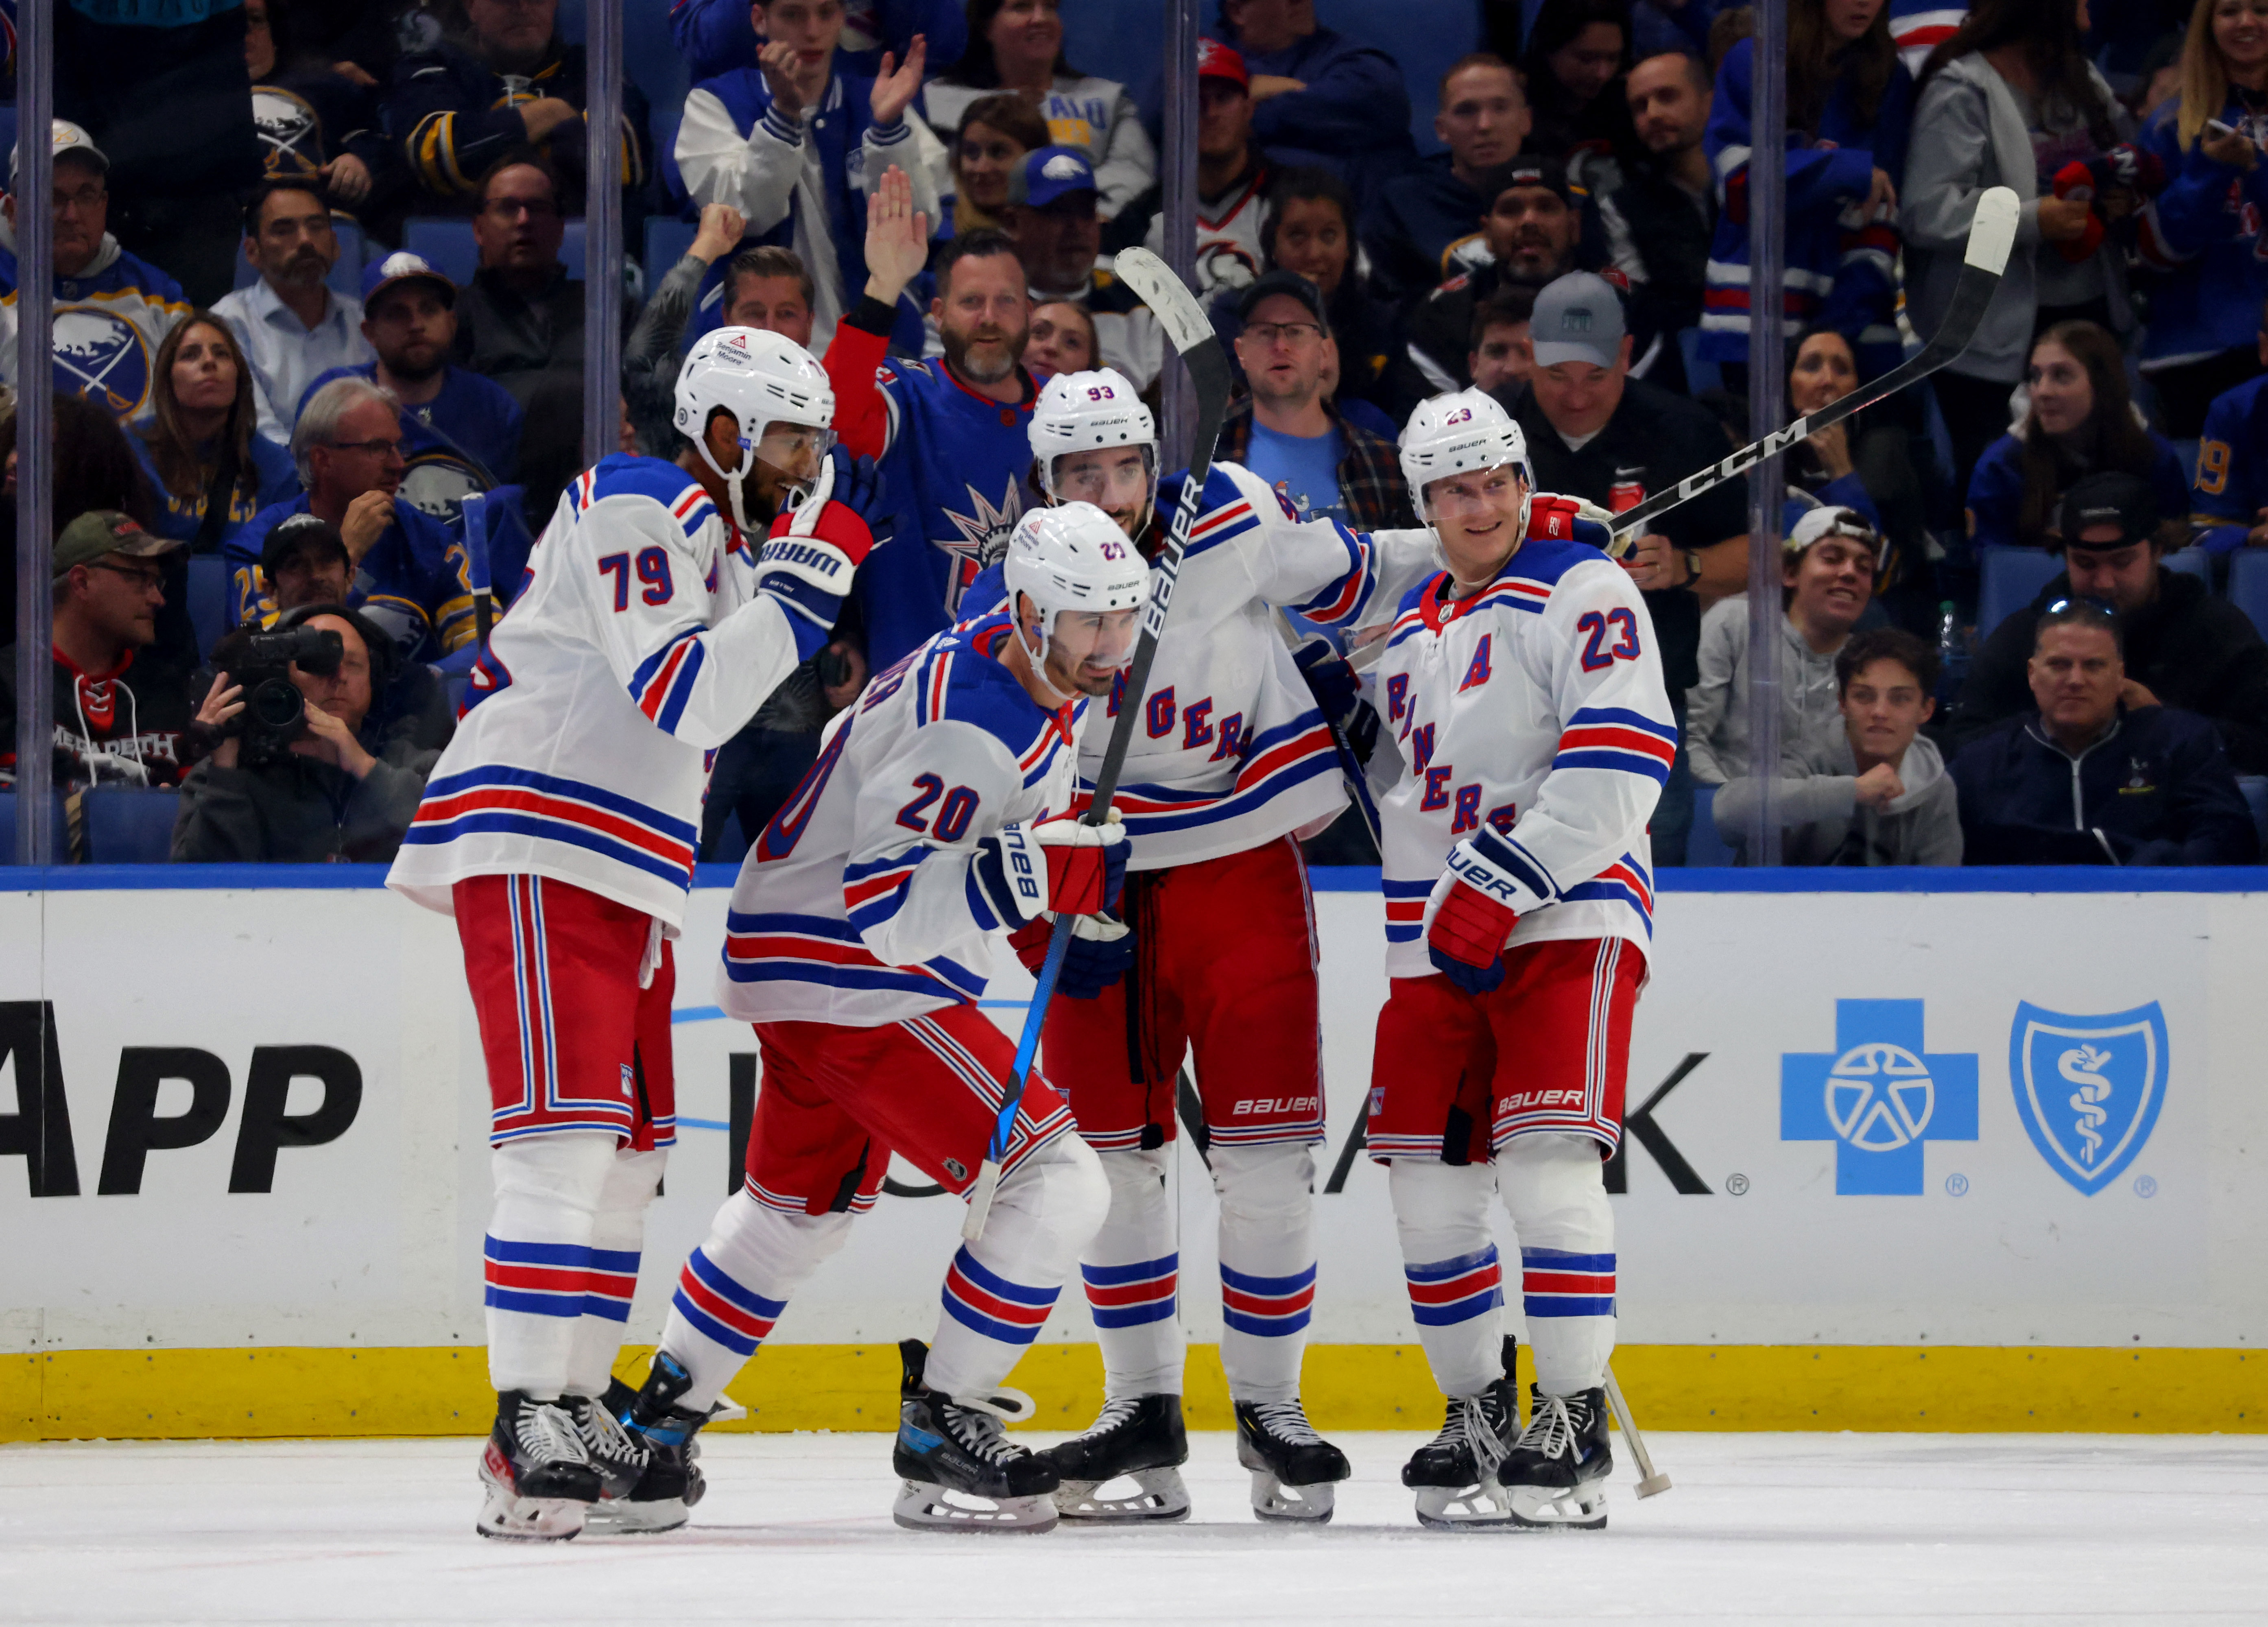 The Rangers and The Sabres played the first sporting event after 9